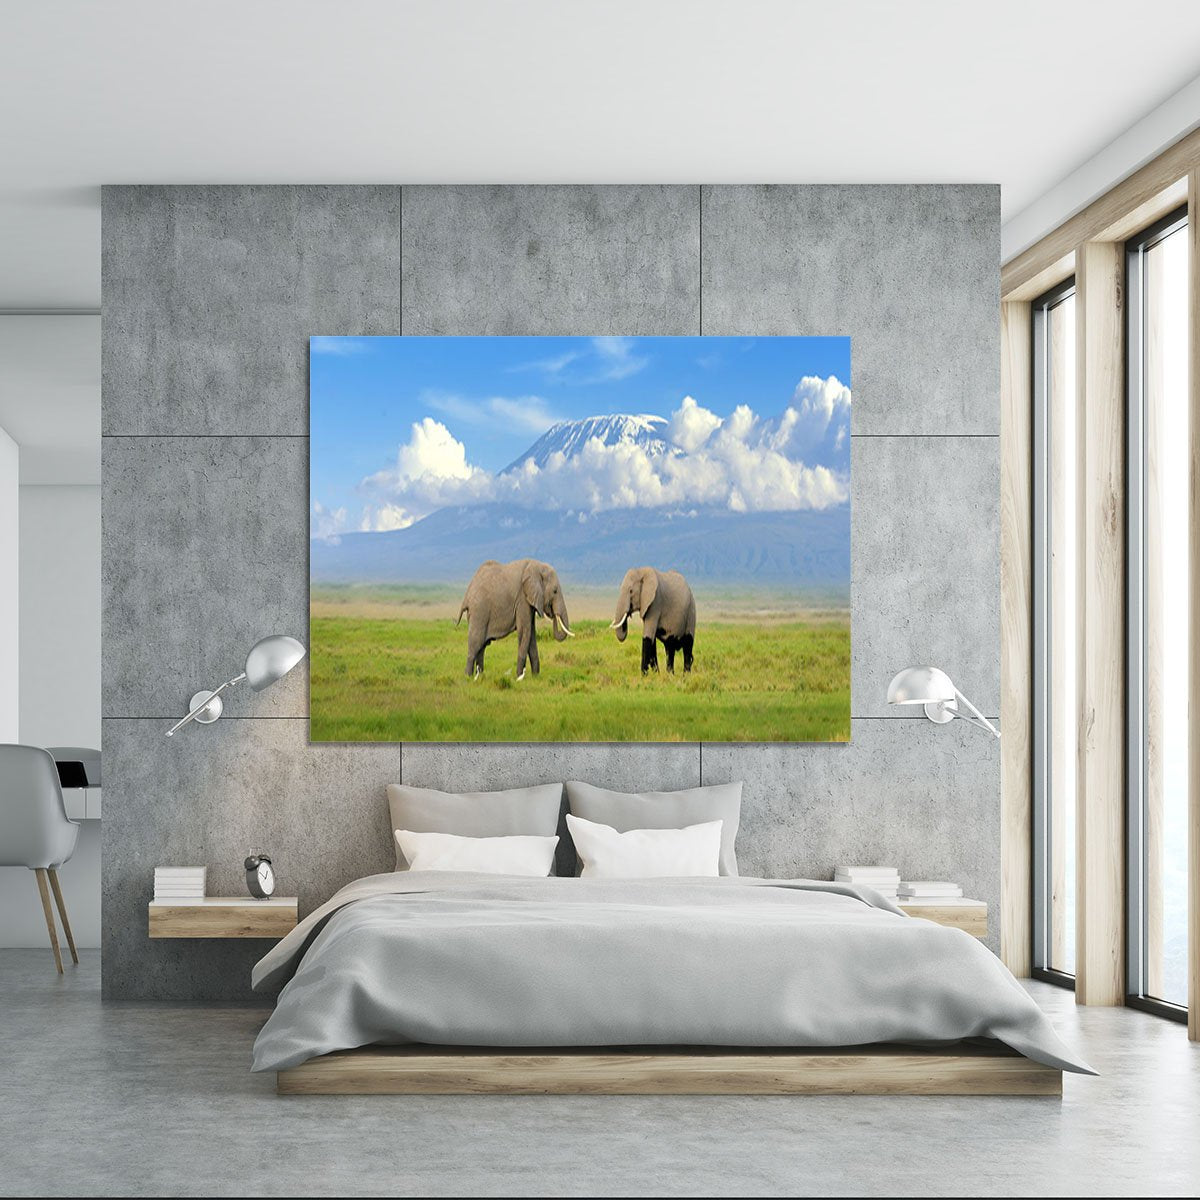 Elephant with Mount Kilimanjaro in the background Canvas Print or Poster